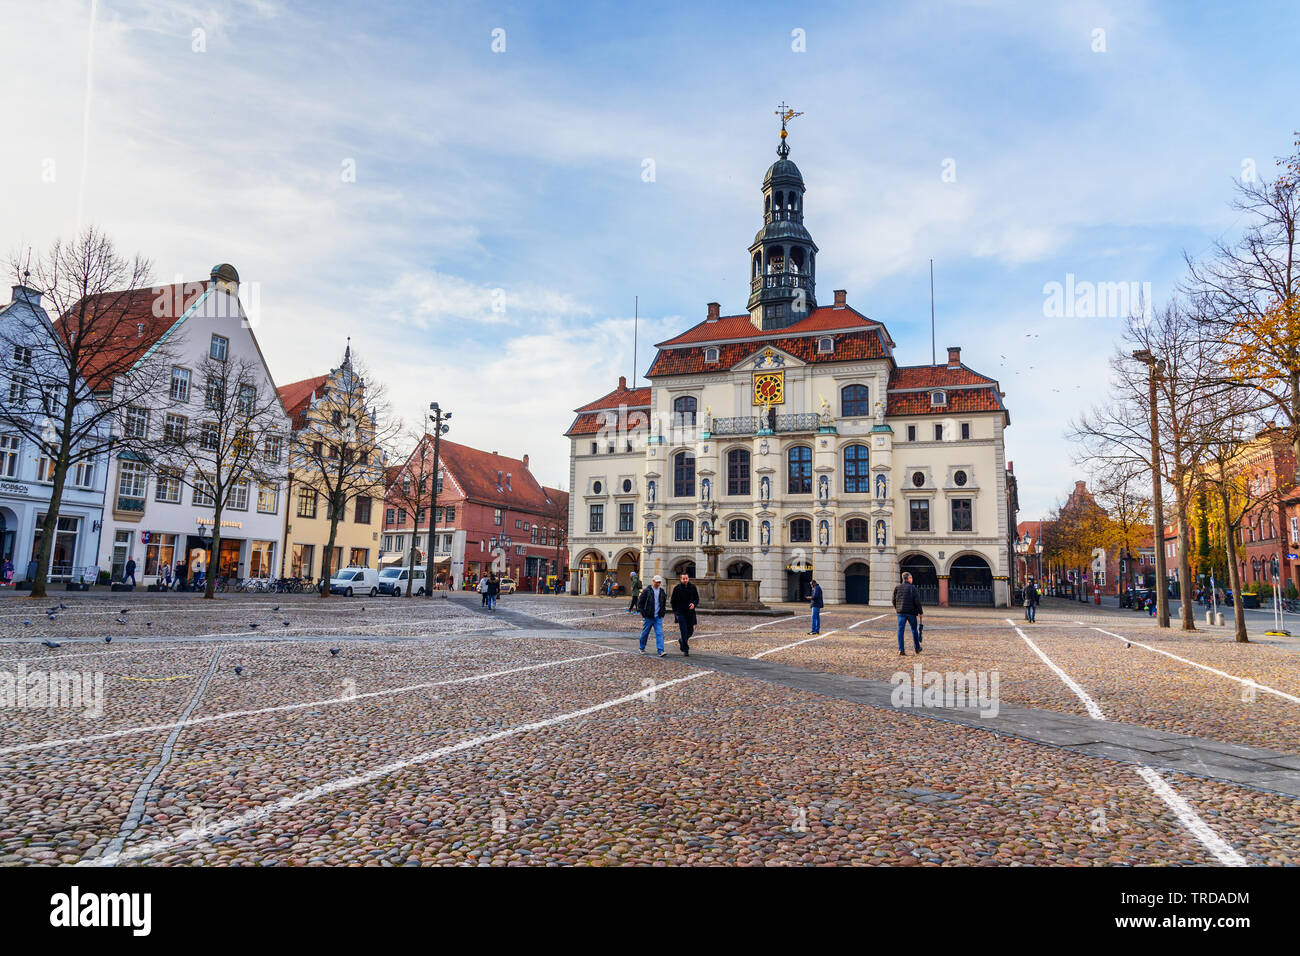 Luneburg, Germany - November 06, 2018: Town hall or Rathaus in Luneburg Stock Photo